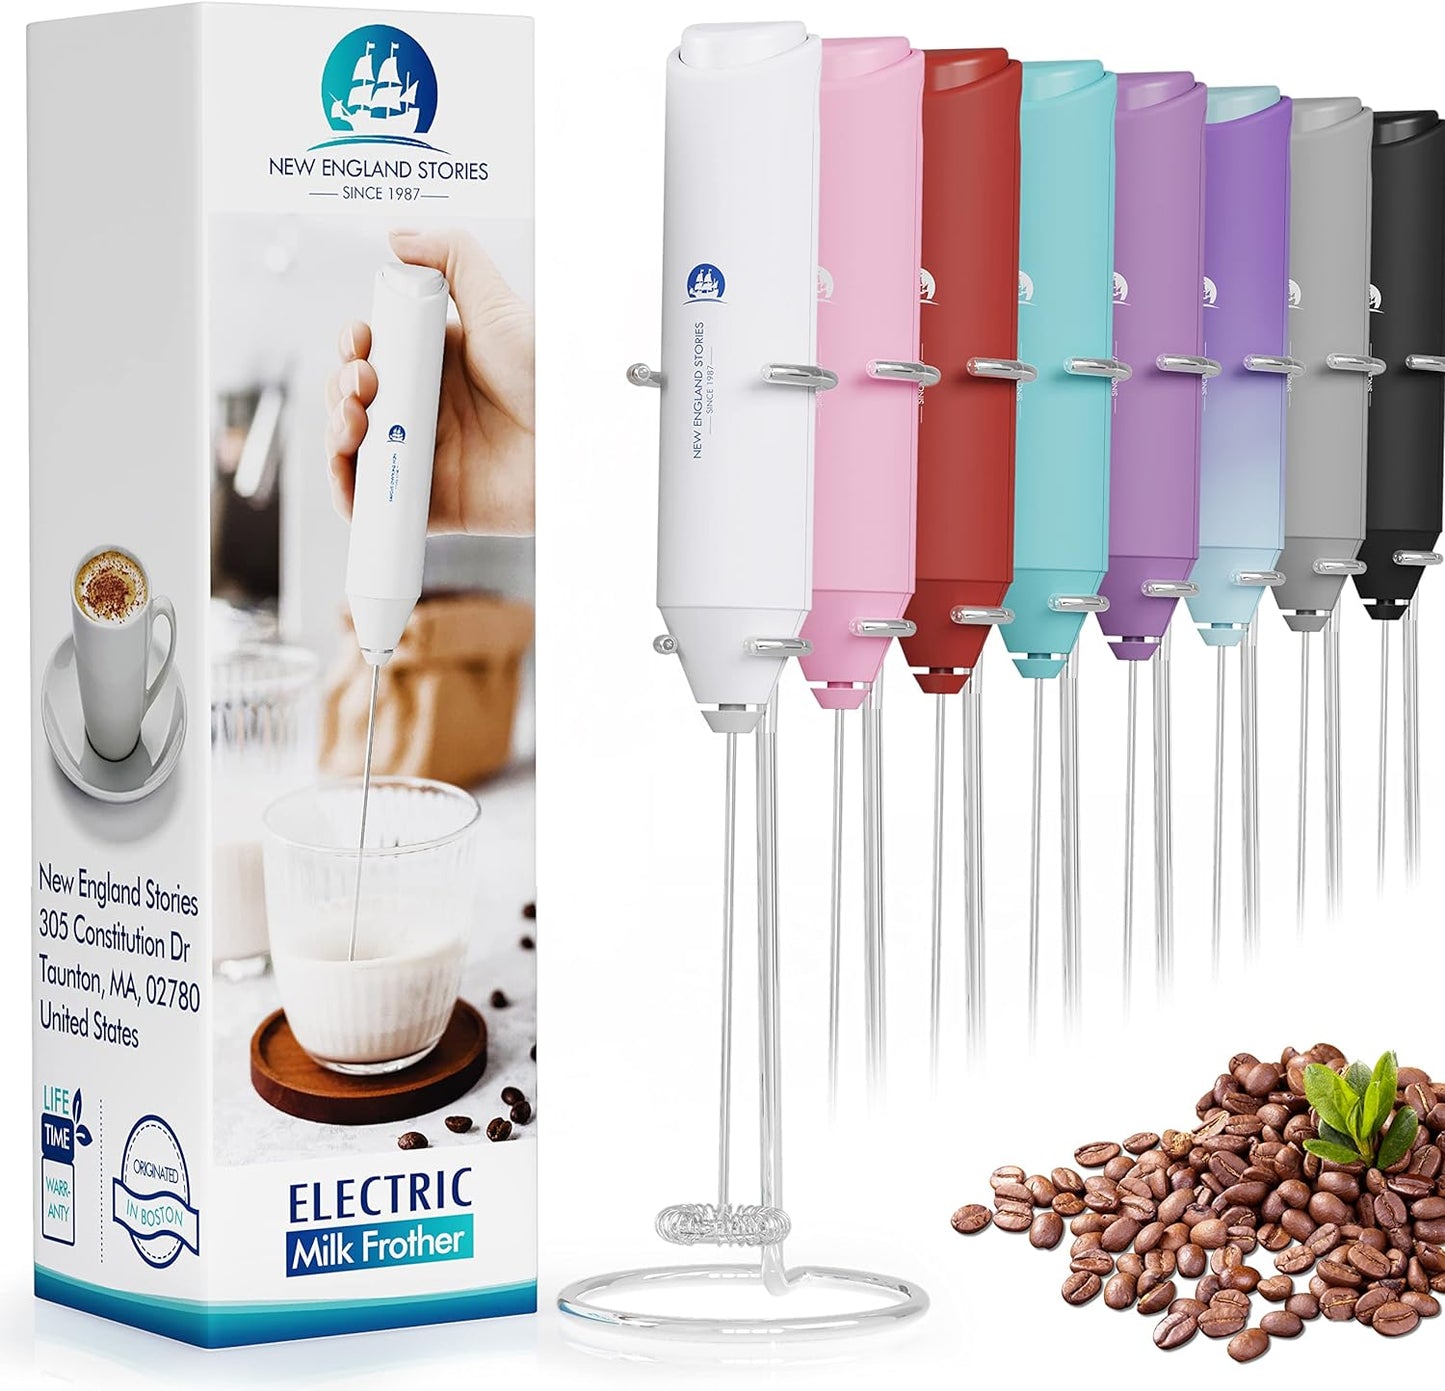 Powerful Milk Frother Handheld Foam Maker, Mini Whisk Drink Mixer for Coffee, Cappuccino, Latte, Matcha, Hot Chocolate, With Stand, White